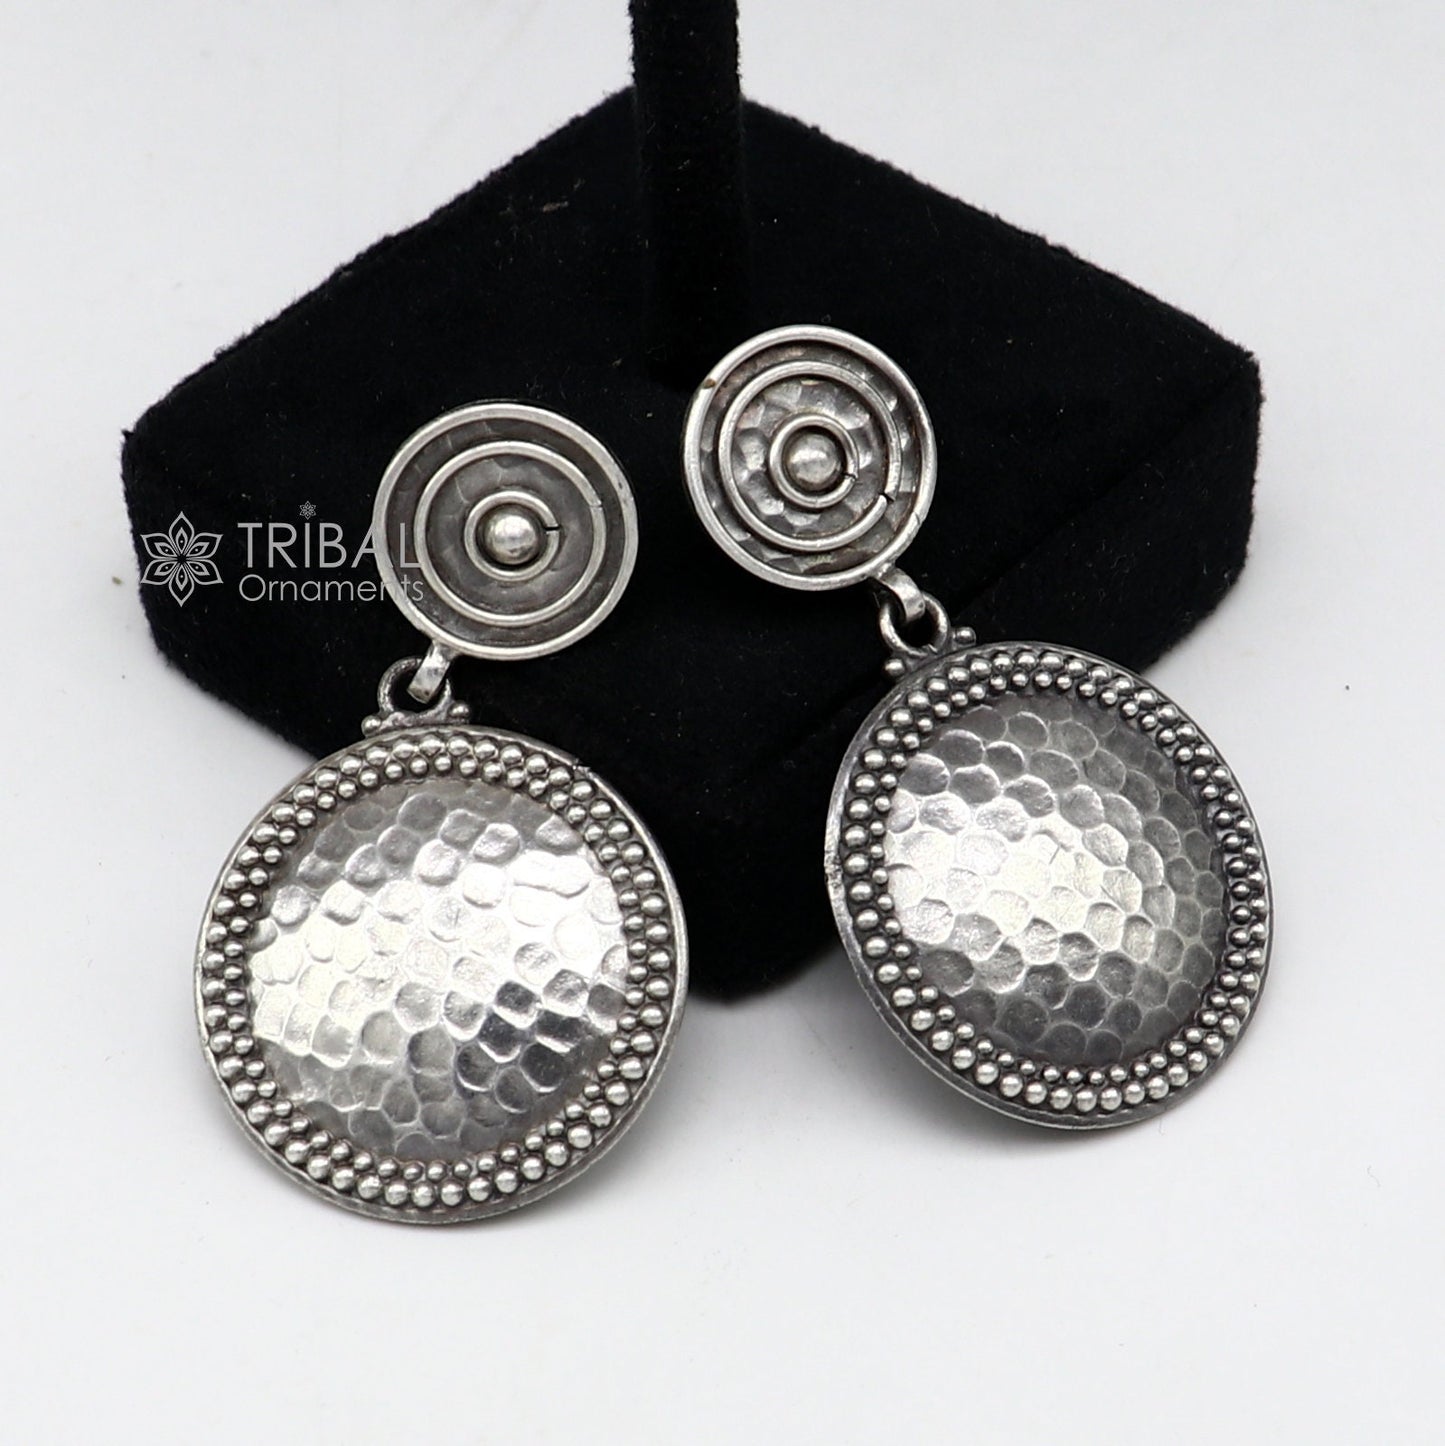 Exclusive stylish 925 Sterling silver traditional cultural design drop dangler fancy earrings, best party functional Navratri jewelry s1239 - TRIBAL ORNAMENTS